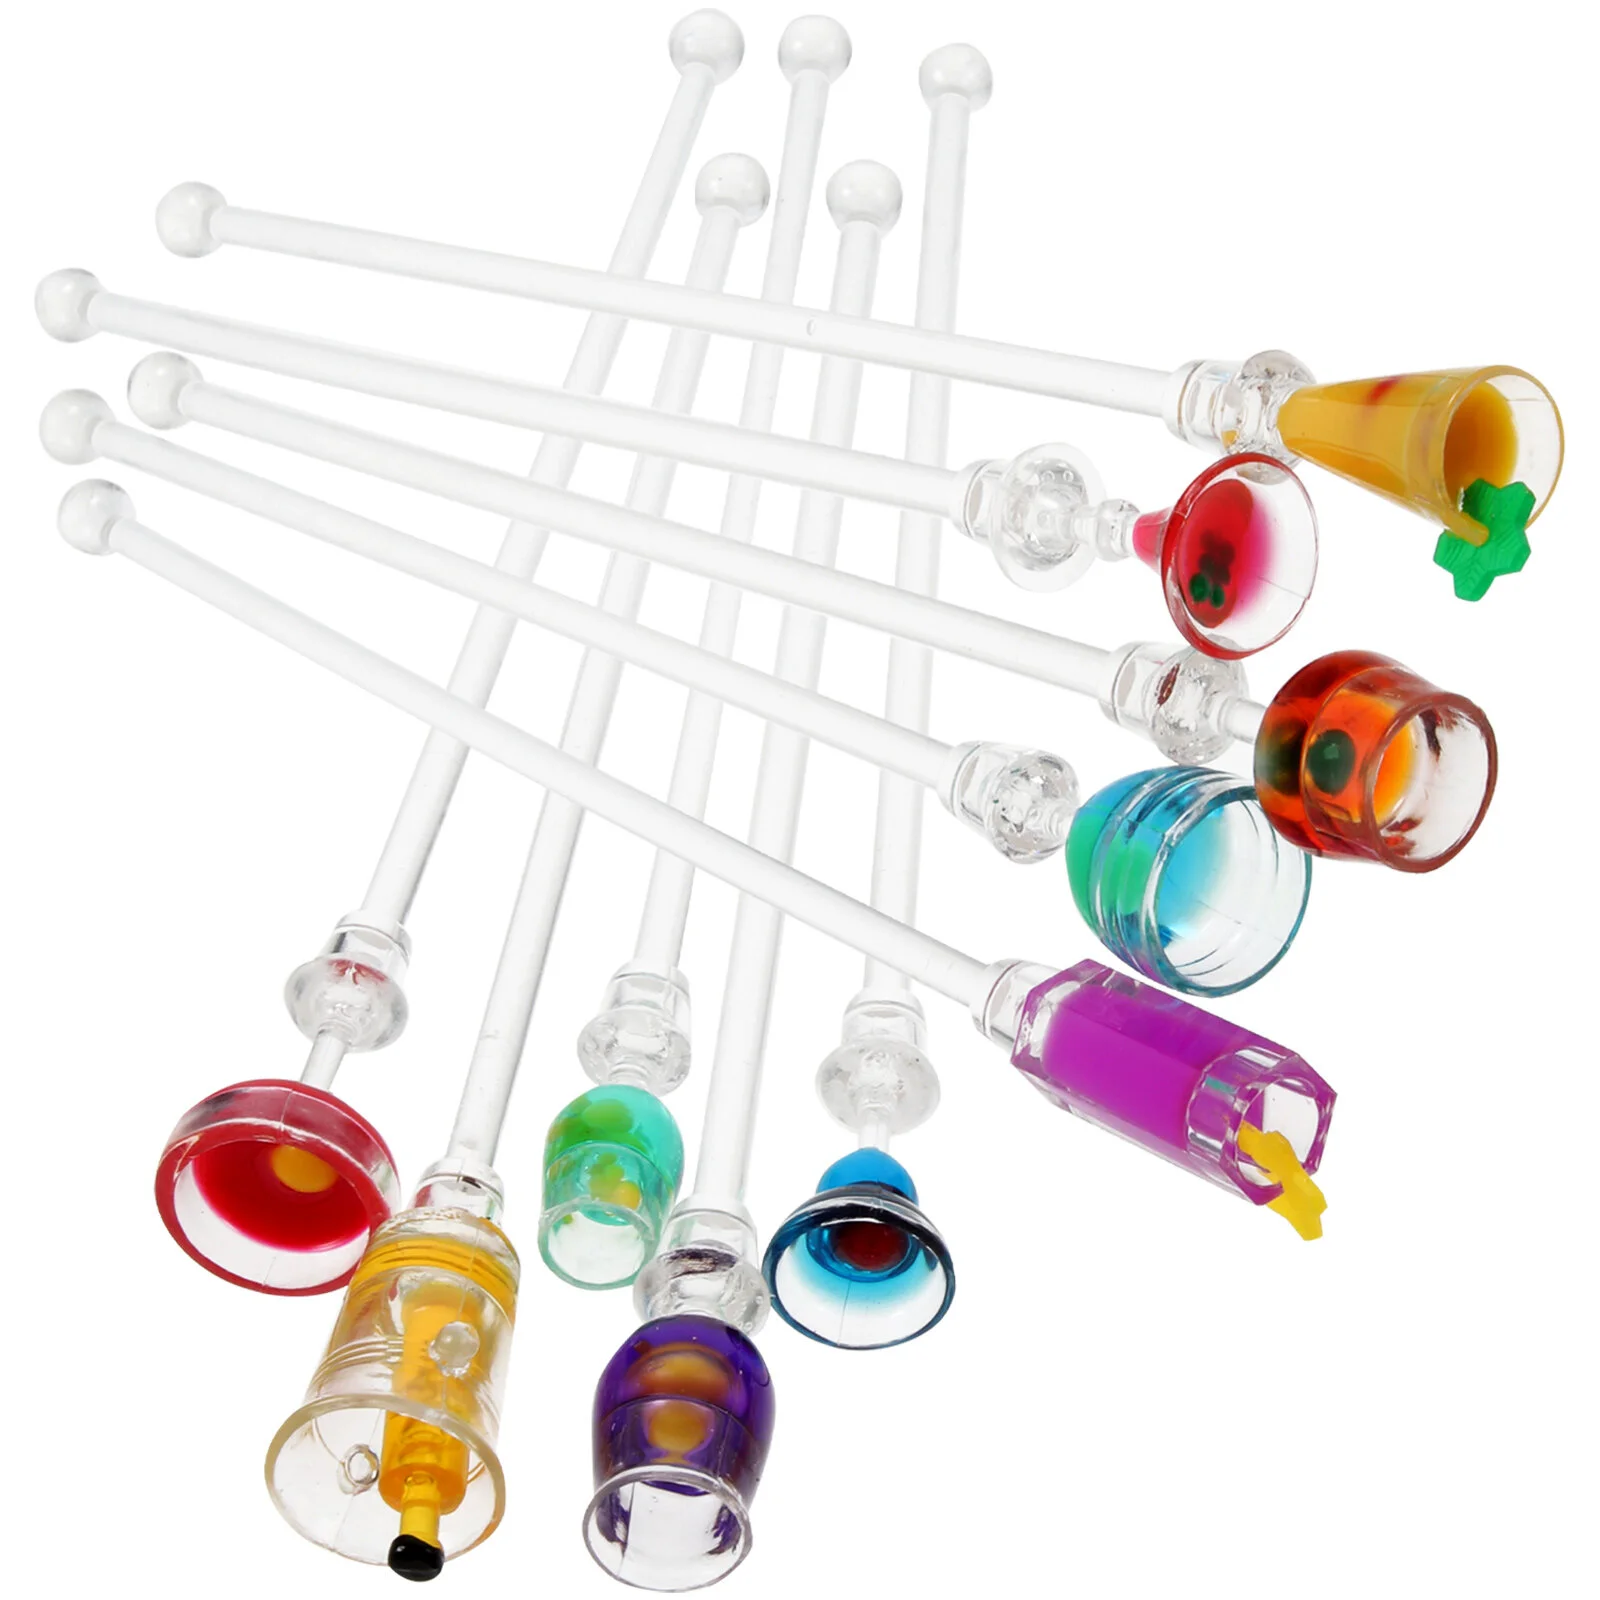 

10pcs 23CM Cocktail Mixer Stirs with Colorful Miniature Accessory Stirring Mixing Sticks Long Handle Stirring Mixing Sticks for